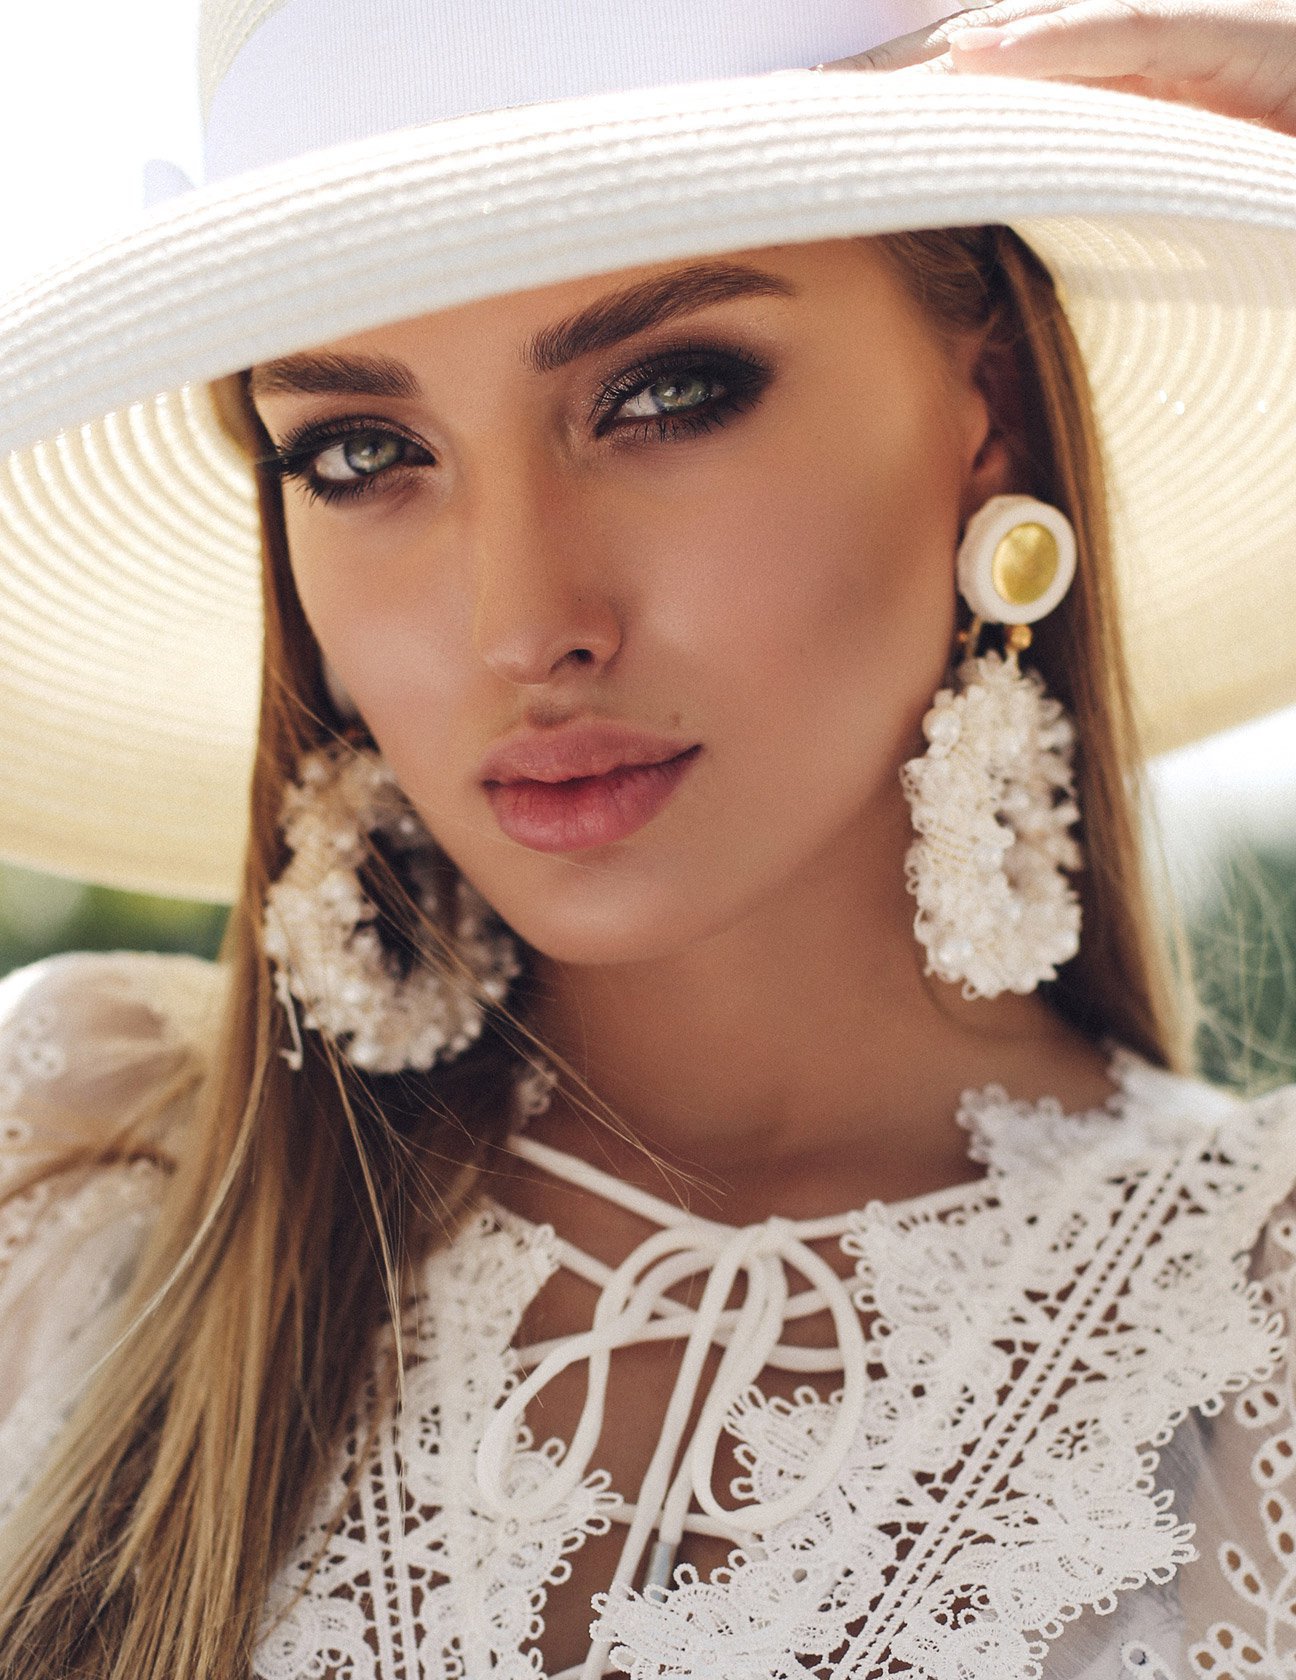 pretty blonde dysport patient model wearing a lacey white top and sunhat